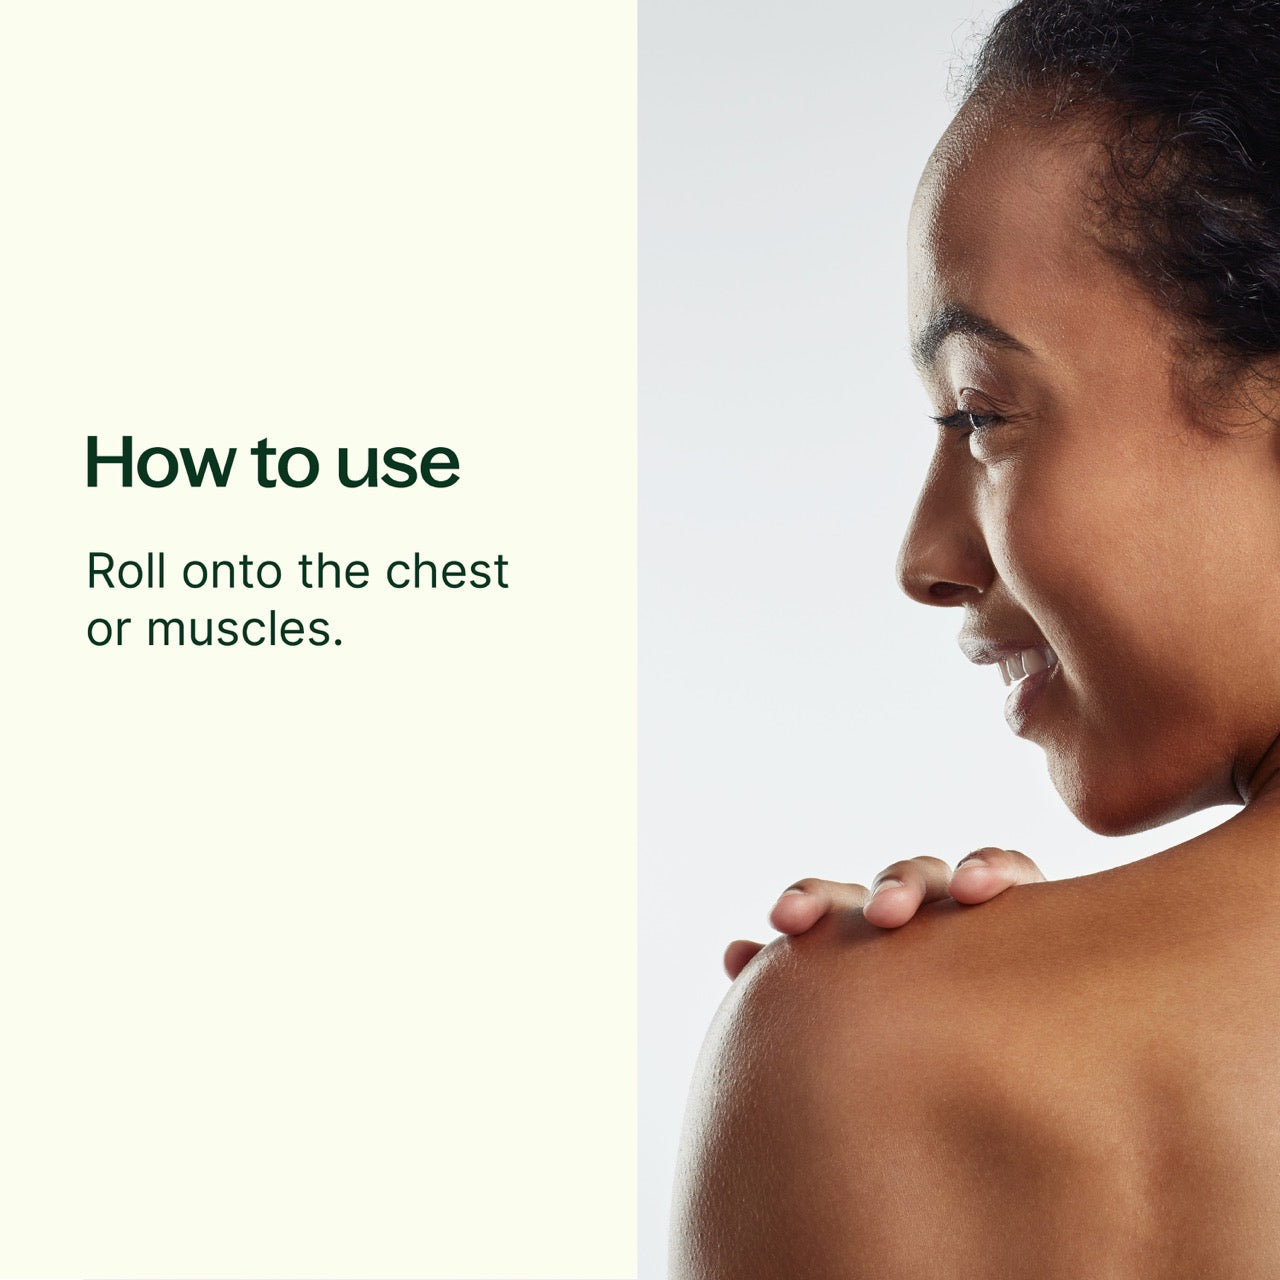 How To Use Eucalyptus Globulus Essential Oil Pre-Diluted Roll-On: Roll onto the chest or muscles